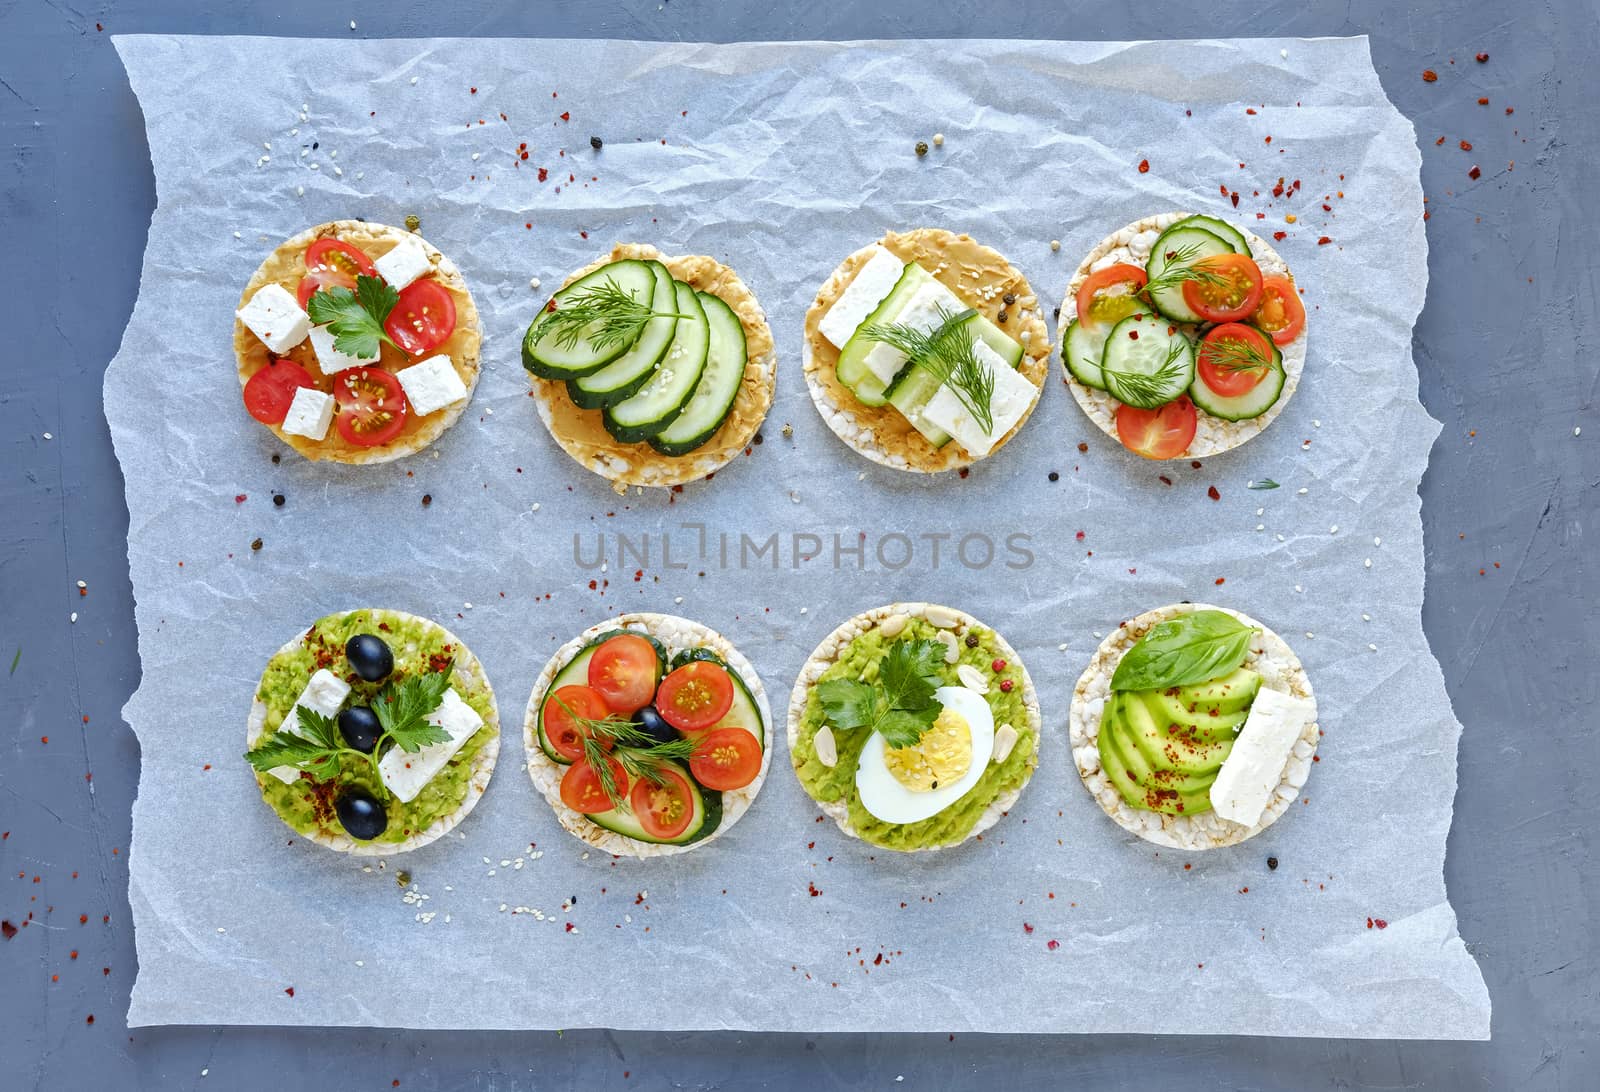 Assorted tasty appetizers with fresh vegetables, feta cheese and egg on crumpled paper viewed from overhead in two neat rows